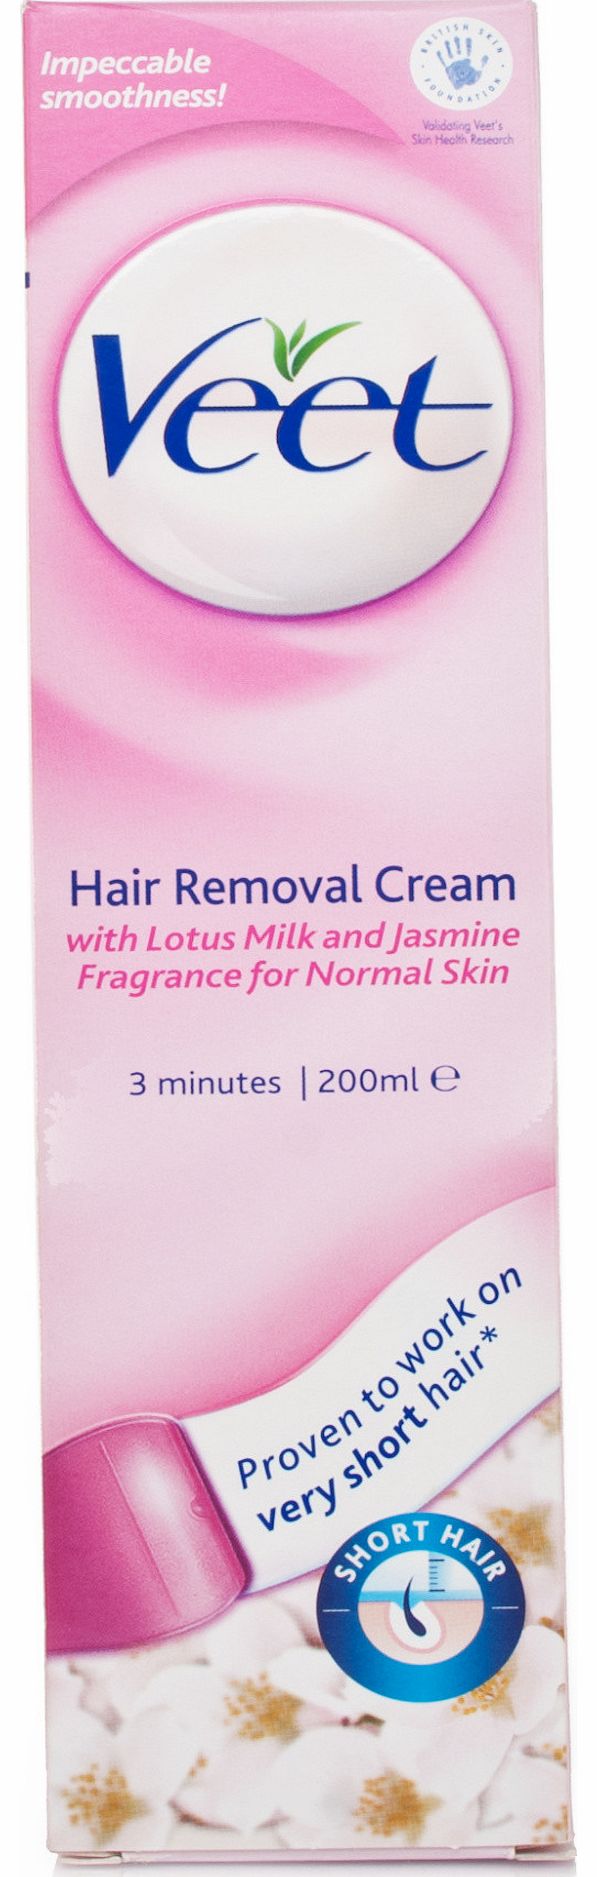 3 Minute Hair Removal Cream for Normal Skin